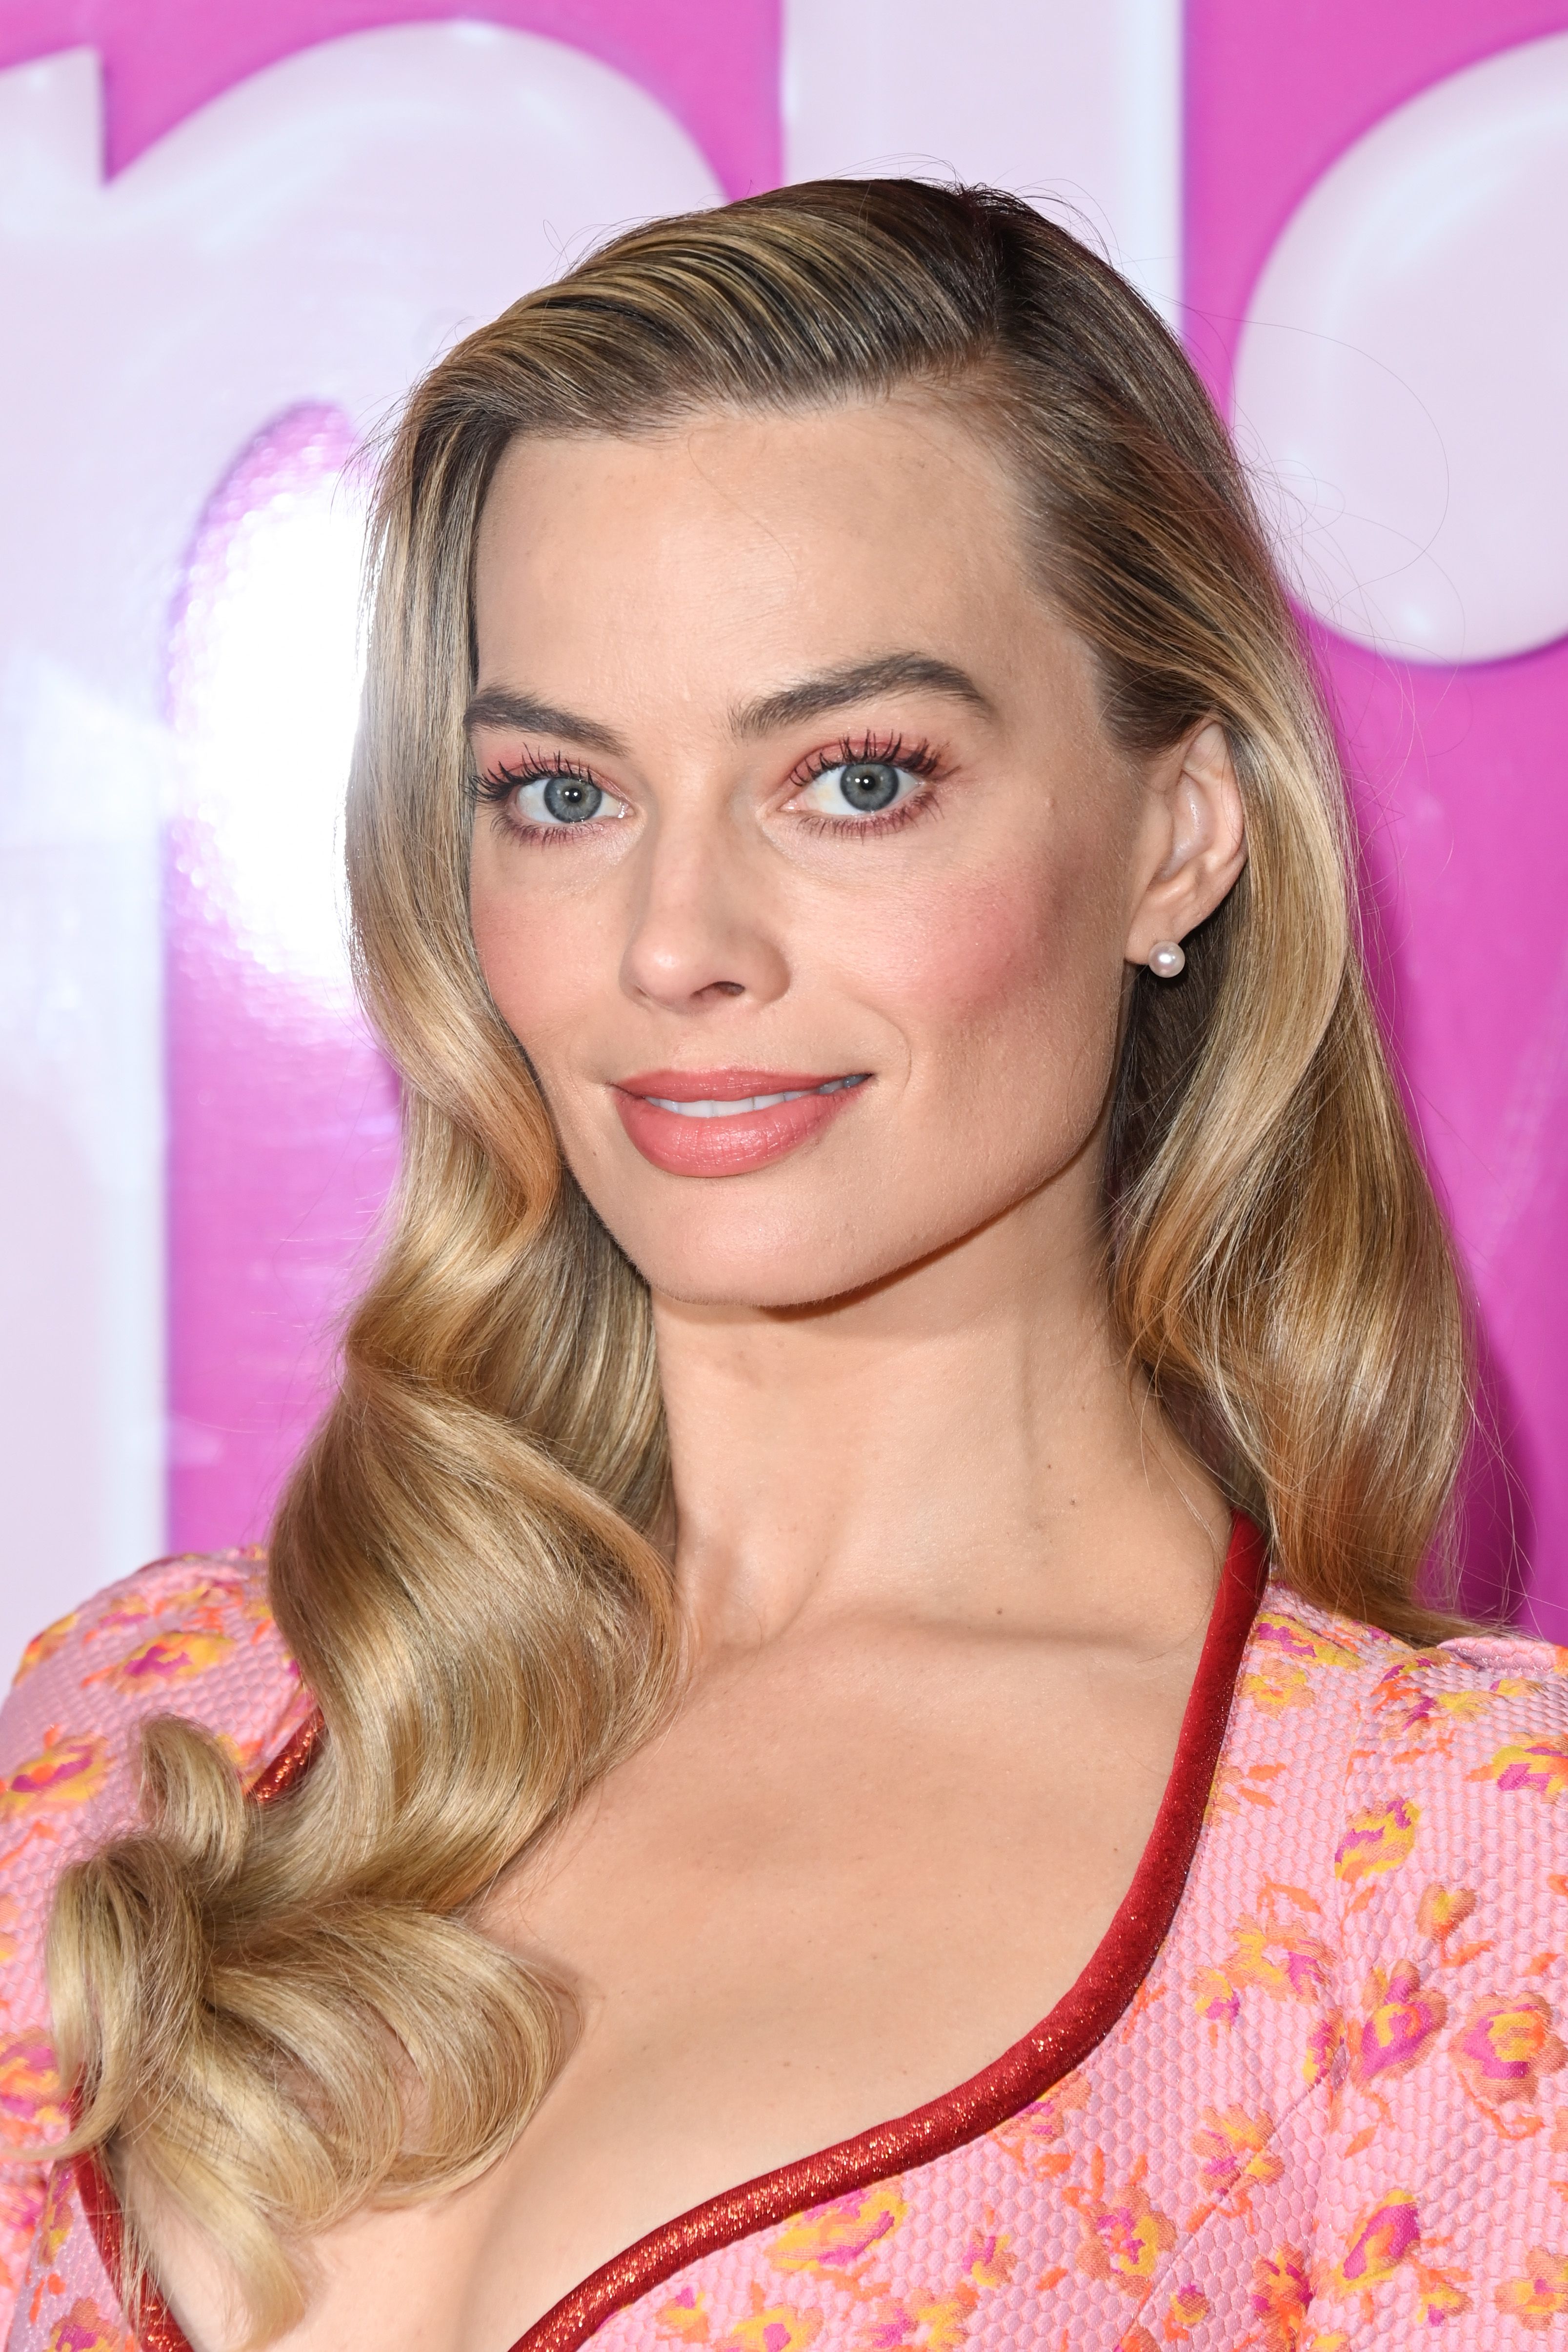 margot-robbie-attends-a-photocall-on-july-13-2023-in-london-news-photo-1689758035.jpg